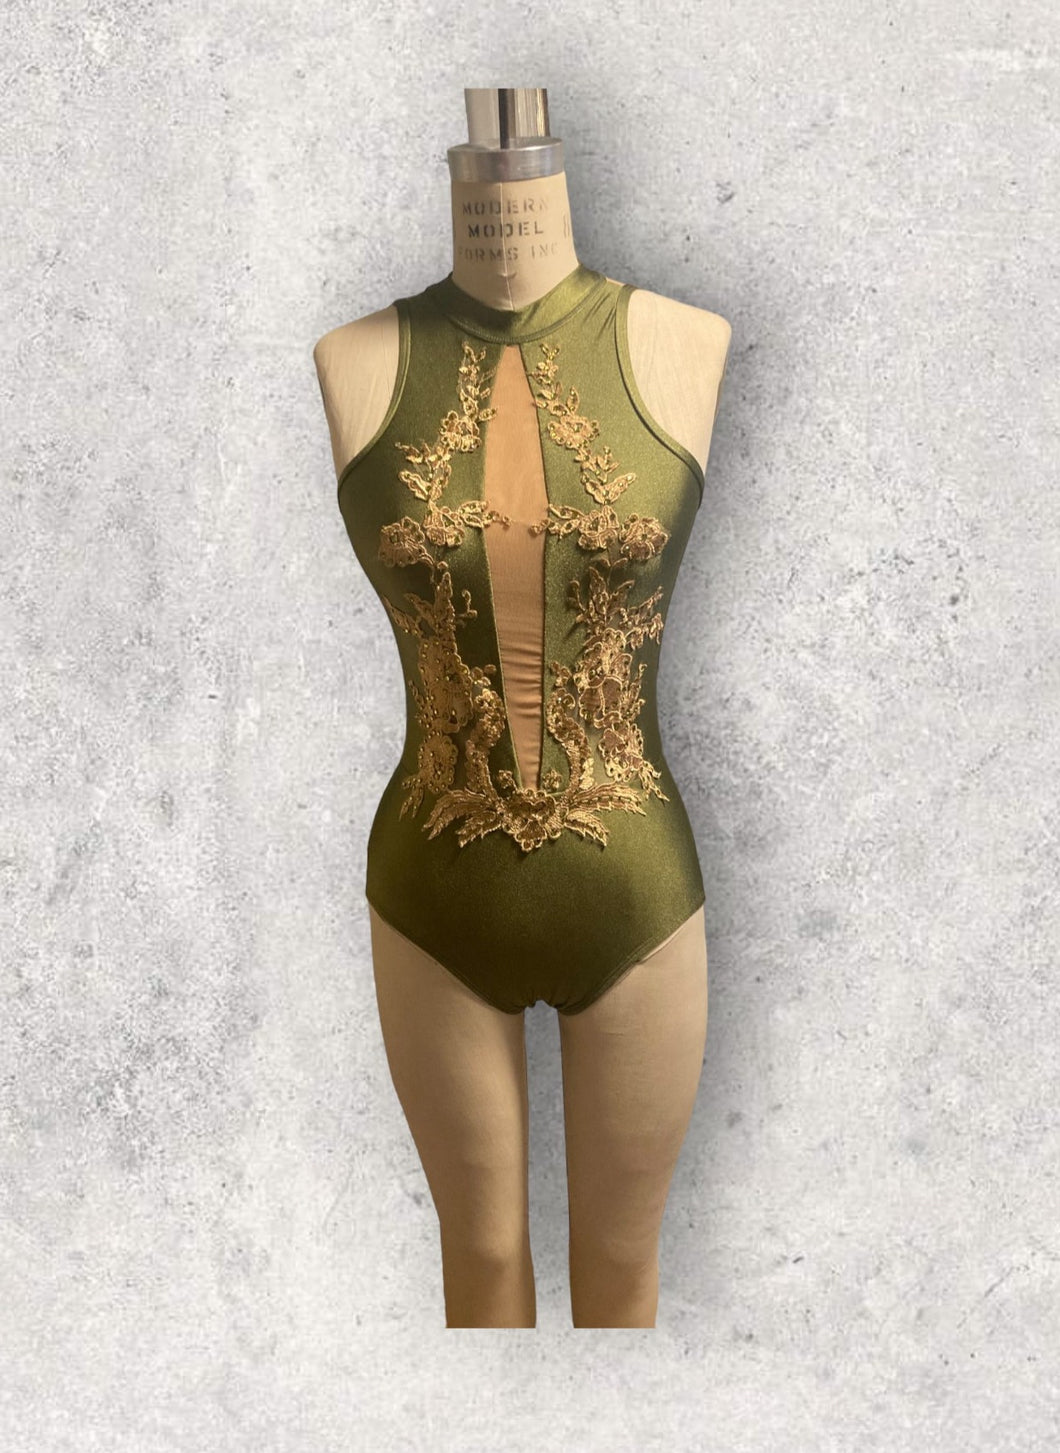 Competitive Dance costume, leotard, bodysuit, olive green with gold applique and crystals